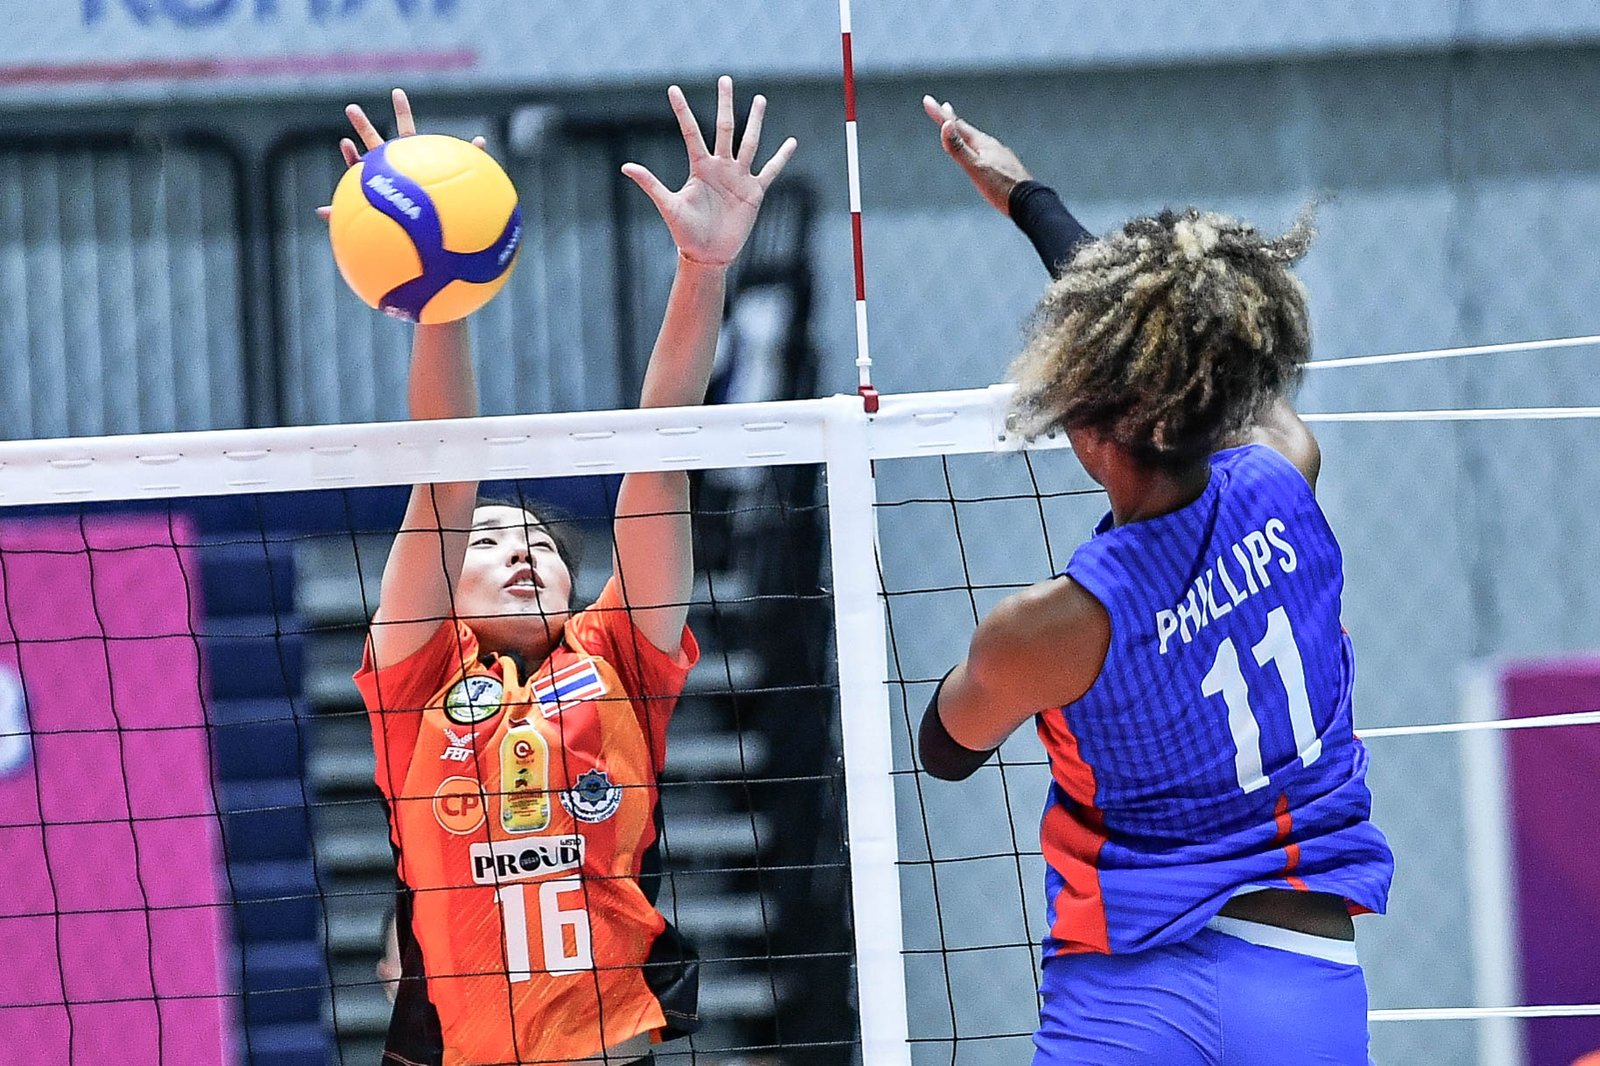 MJ Philips of the PH team in action at the 21st Asian Women’s Club Volleyball Championship  [Asian Volleyball Confederation | Eddy Phongphakthana]